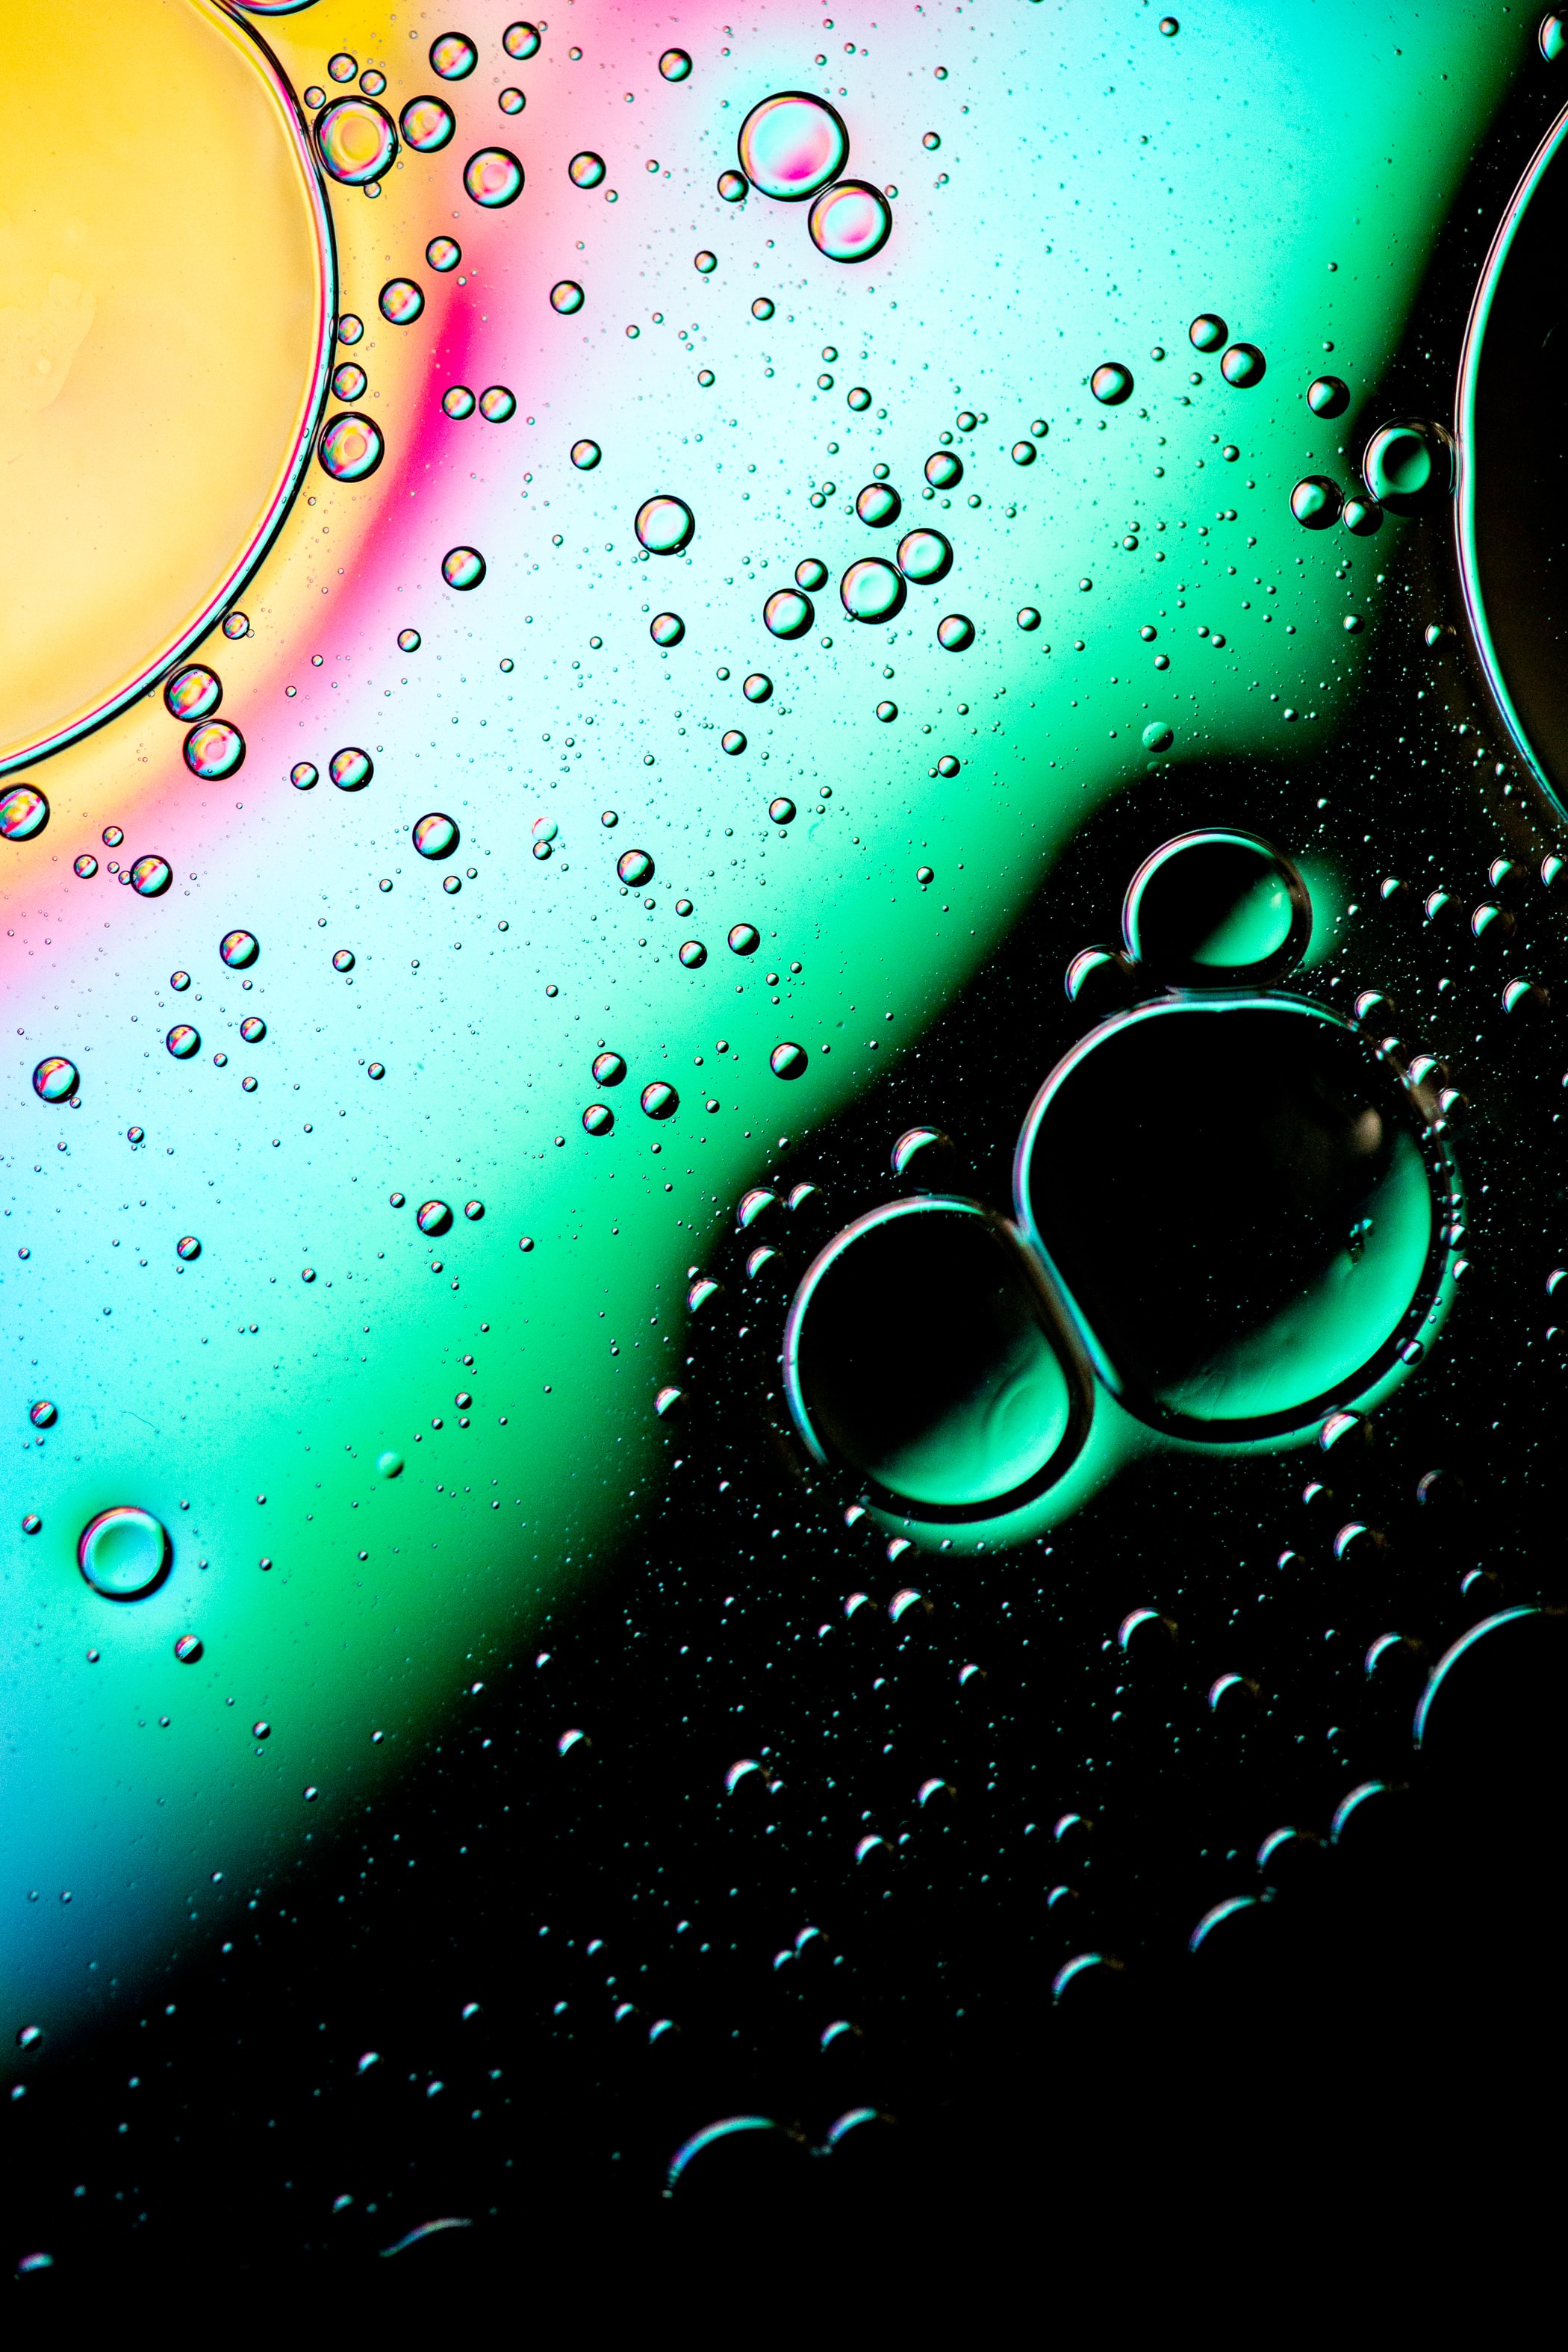 Download background multicolored, abstract, water, bubbles, drops, motley, gradient